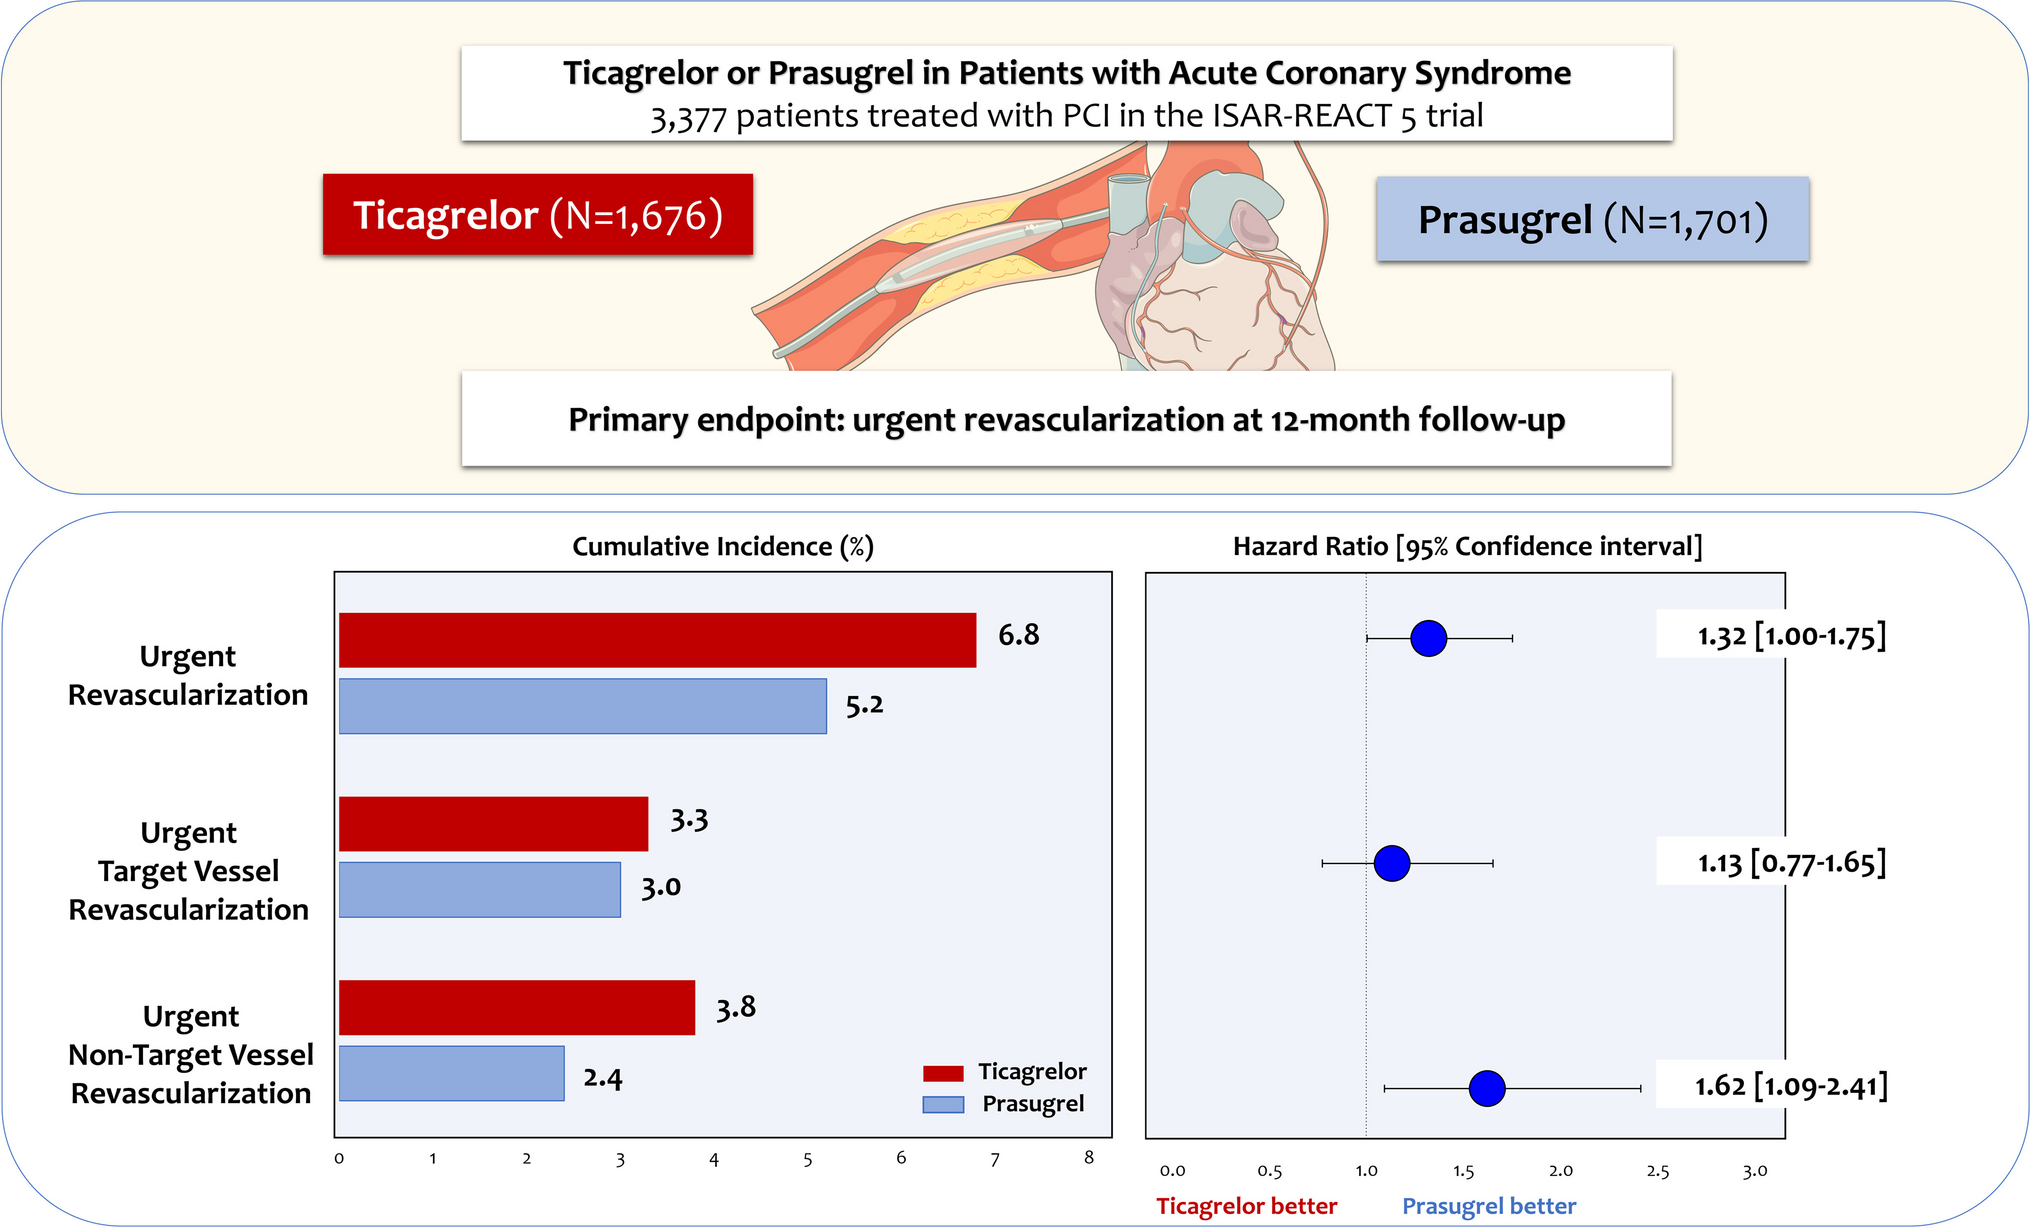 Incidence and pattern of urgent revascularization in acute coronary syndromes treated with ticagrelor or prasugrel